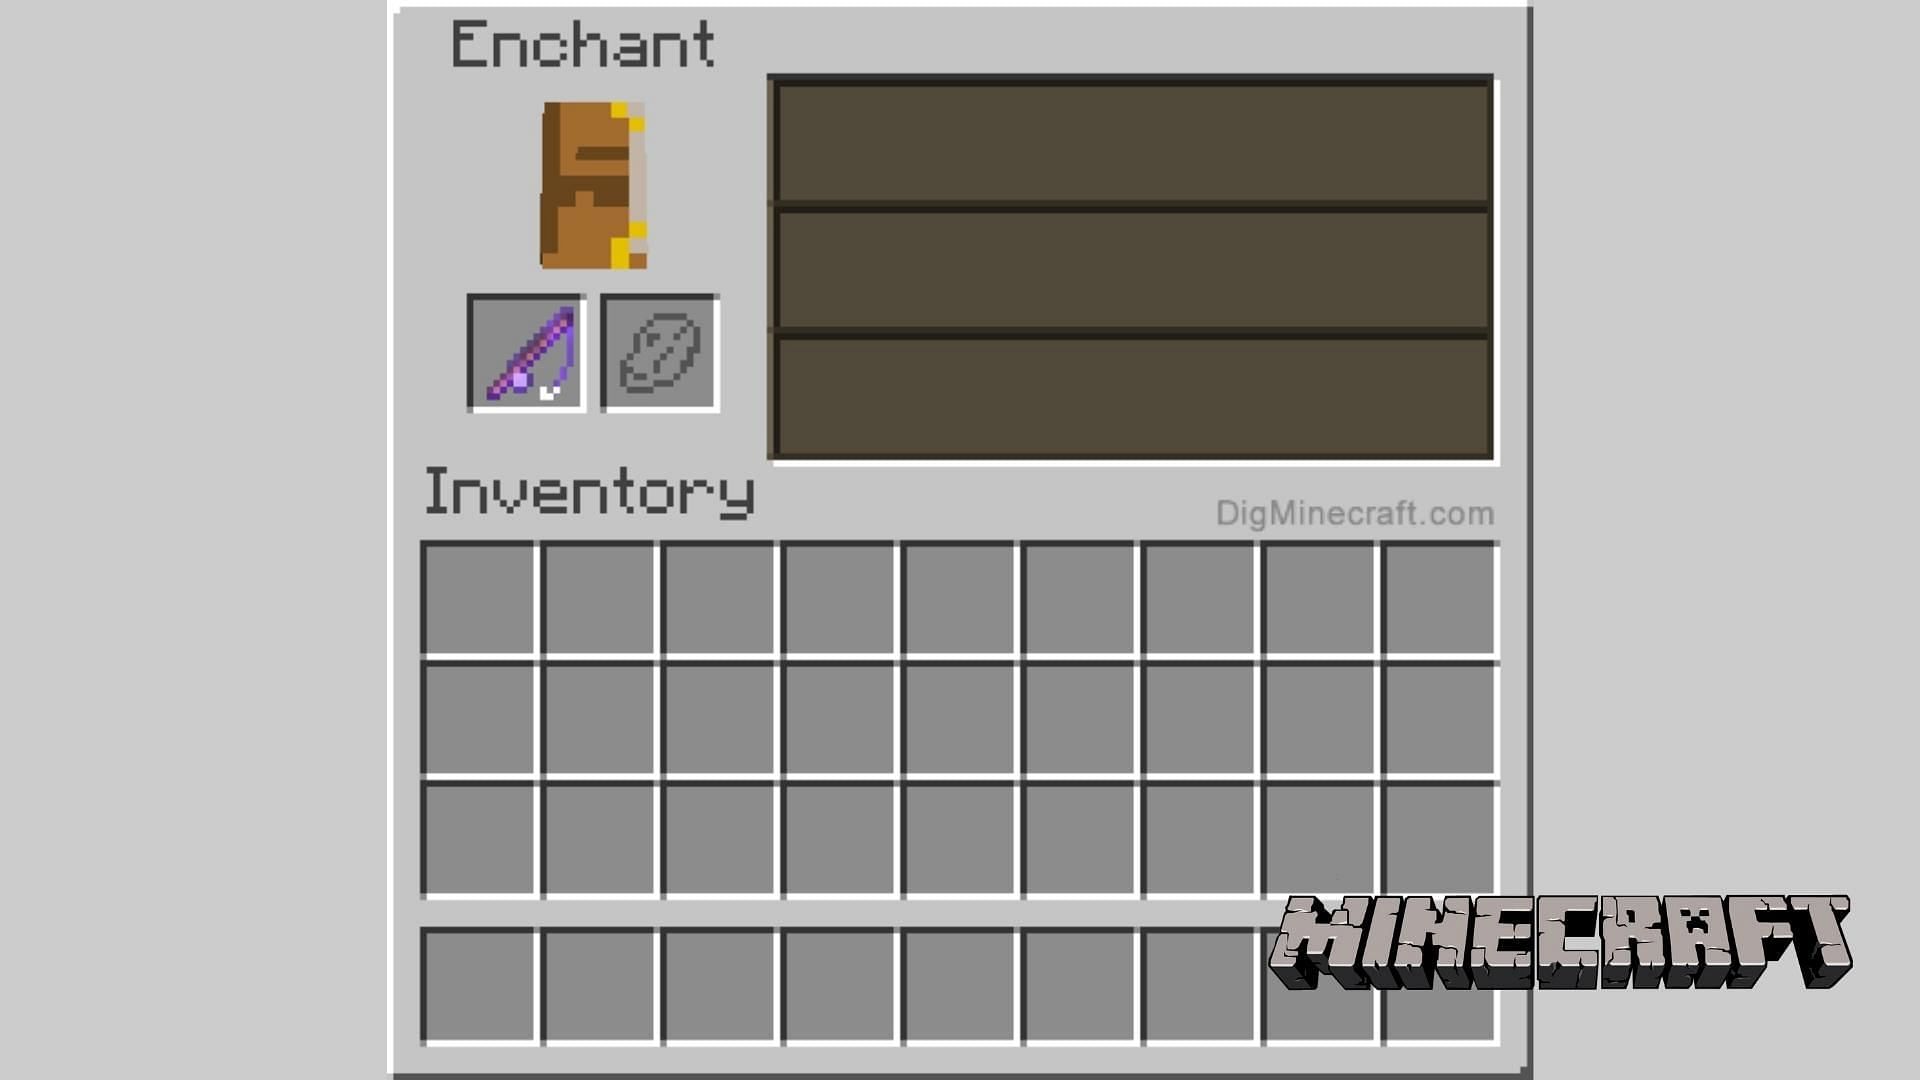 A successfully crafted enchanted fishing rod (Image via DigMinecraft)